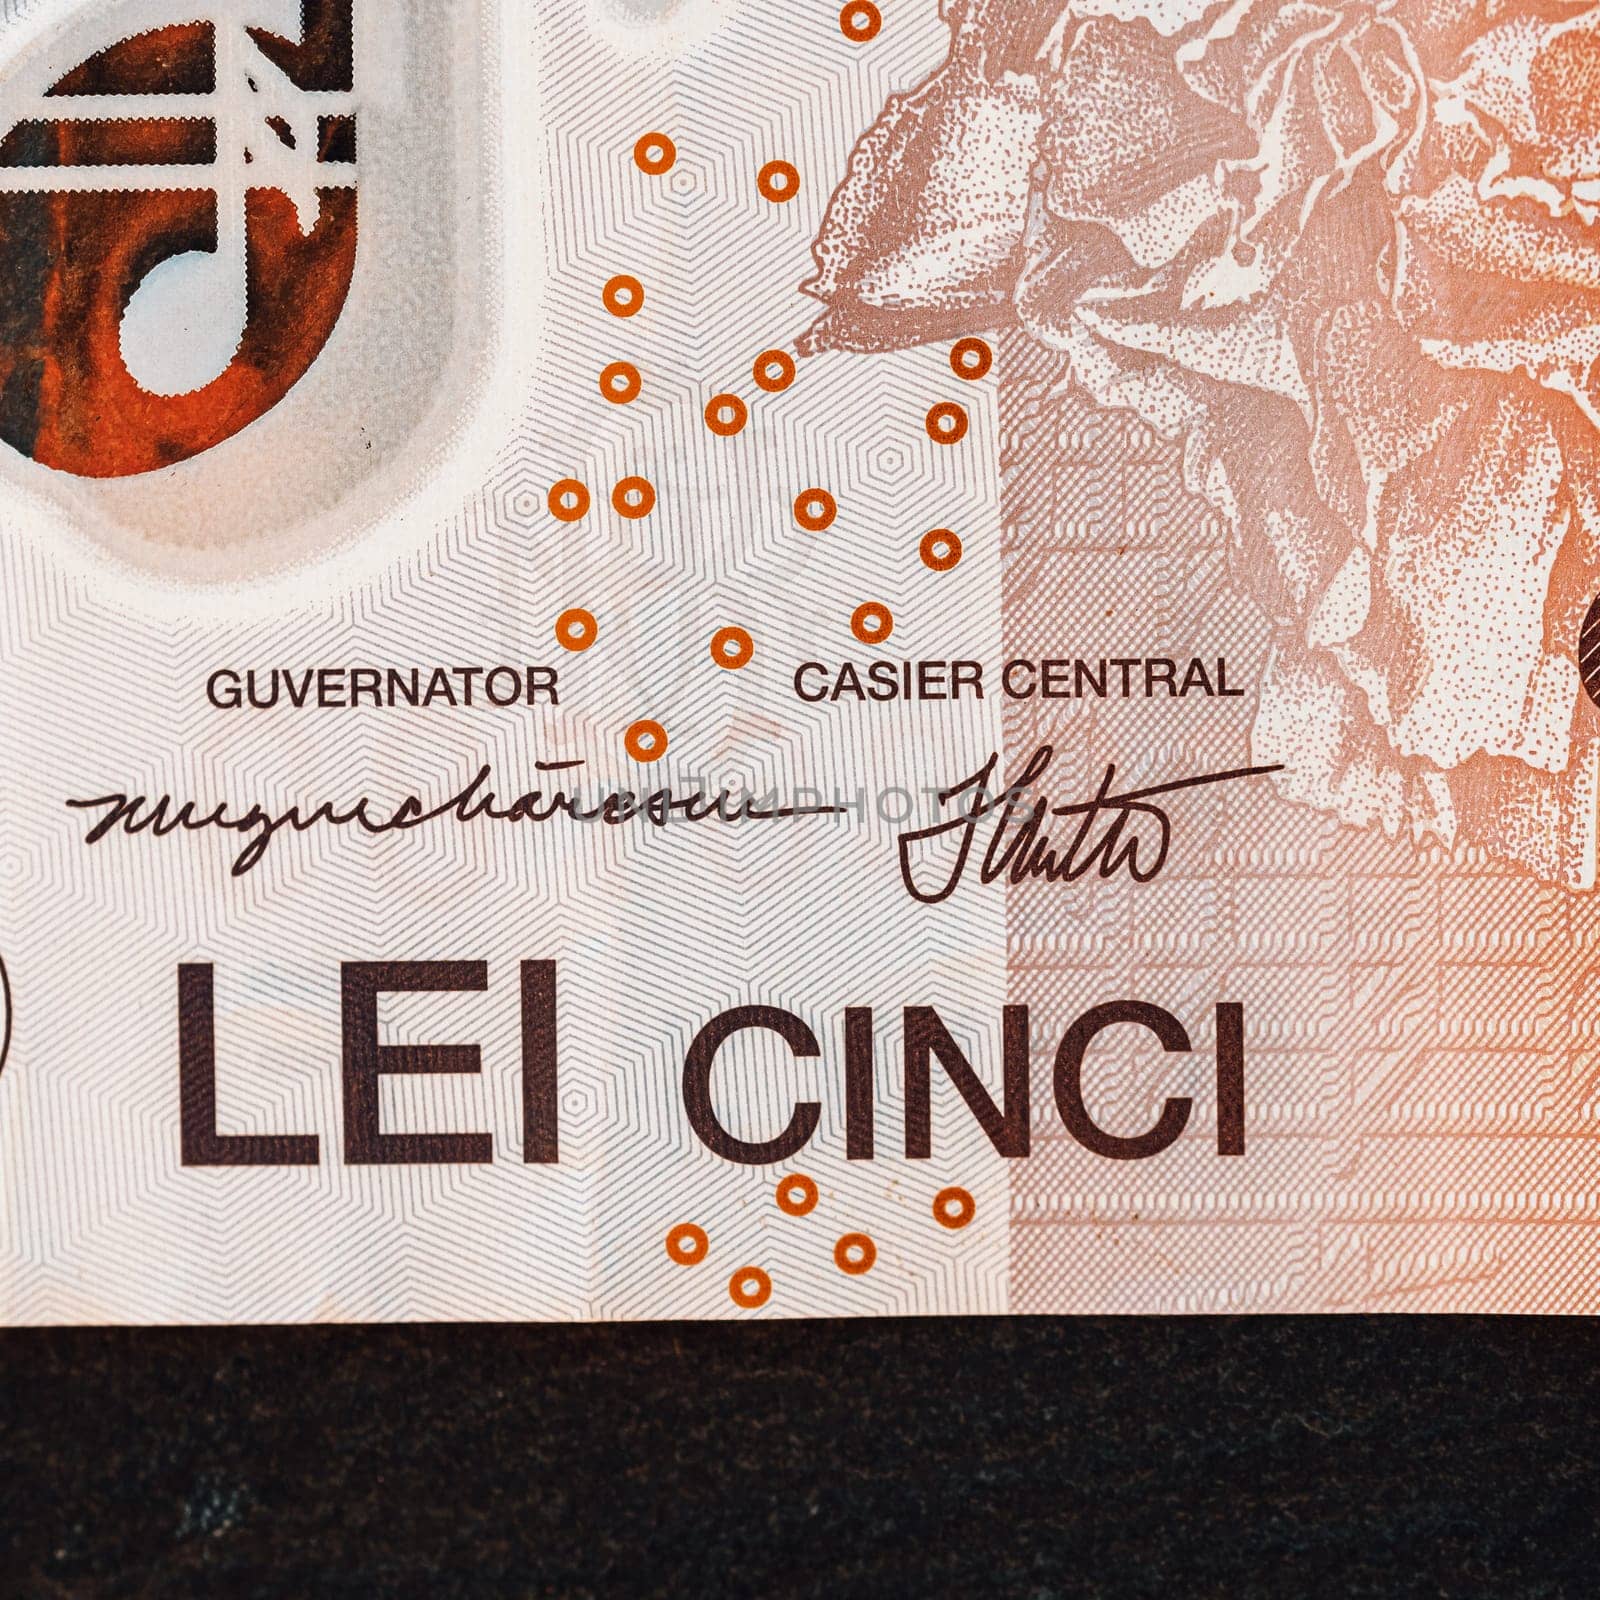 Romanian LEI Currency Banknote. RON Money European Currency by vladispas